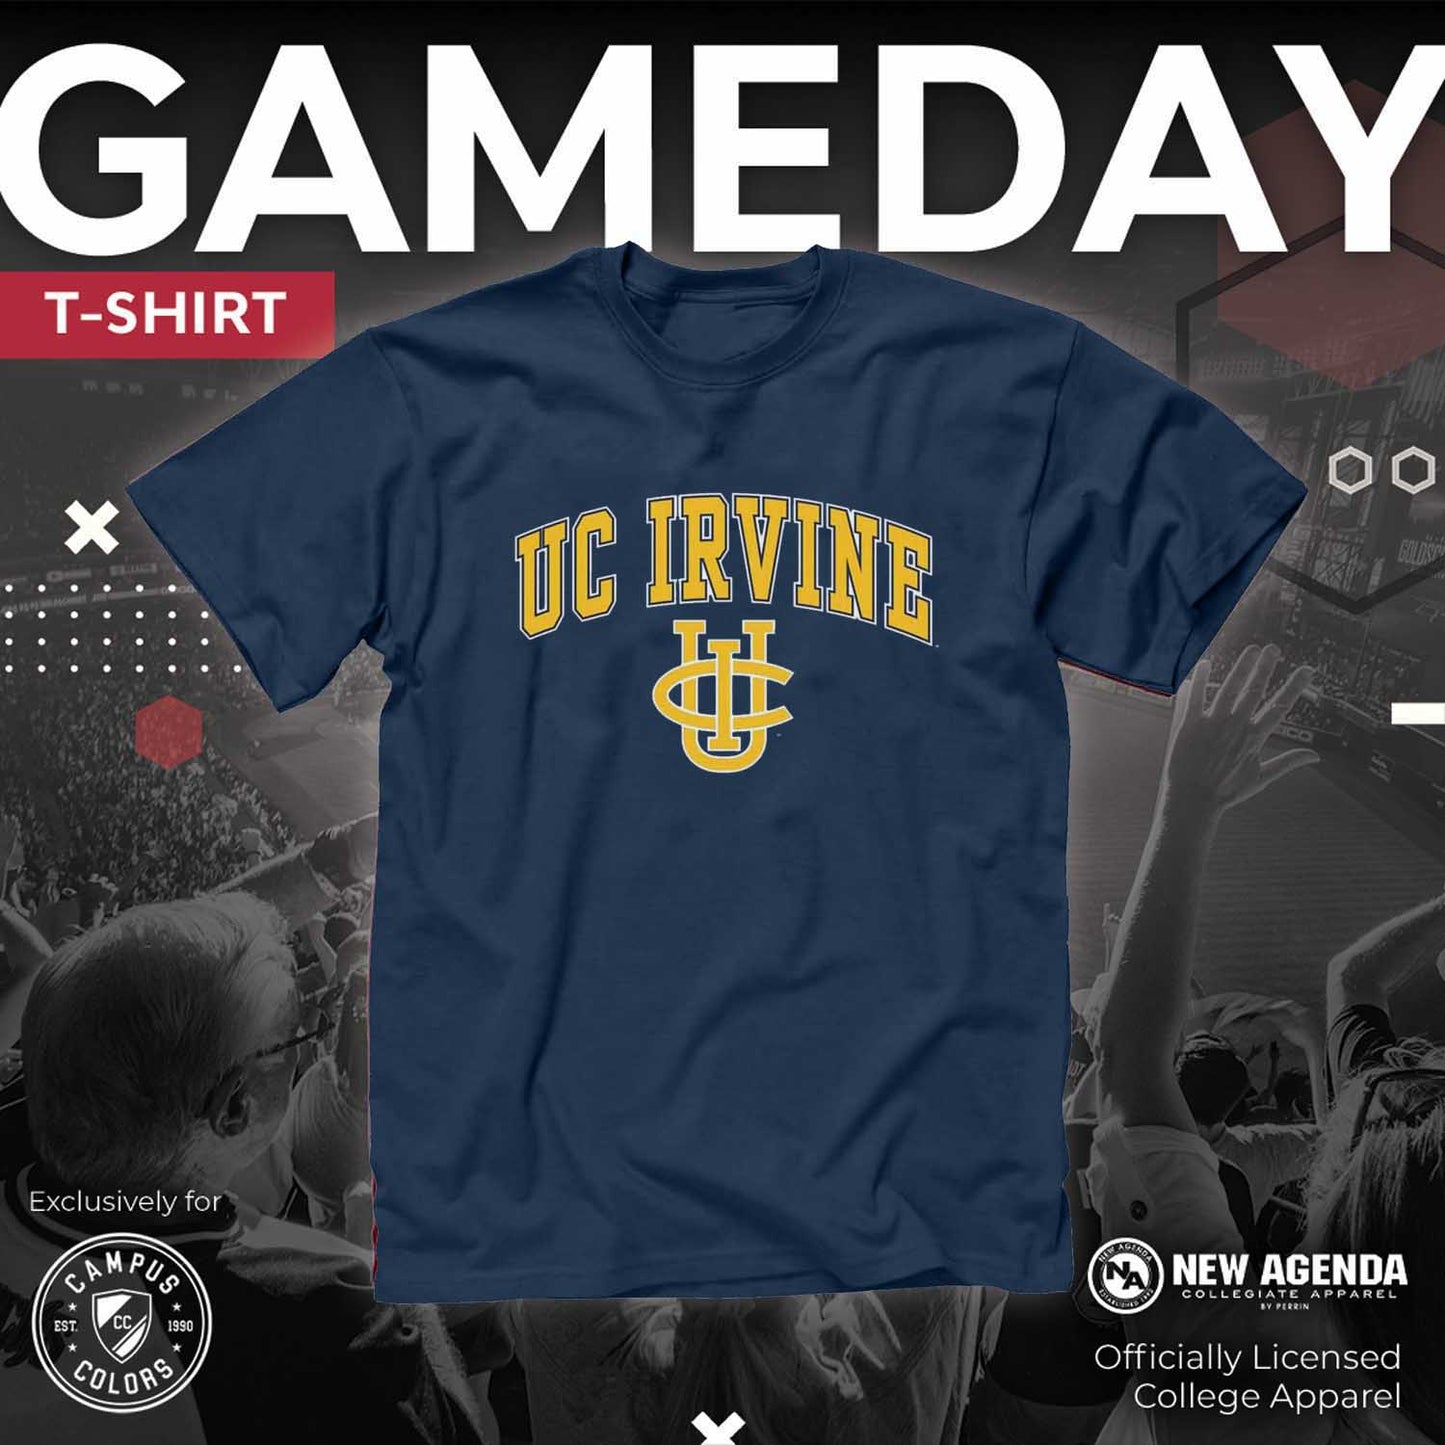 UC-Irvine Anteaters NCAA Adult Gameday Cotton T-Shirt - Navy